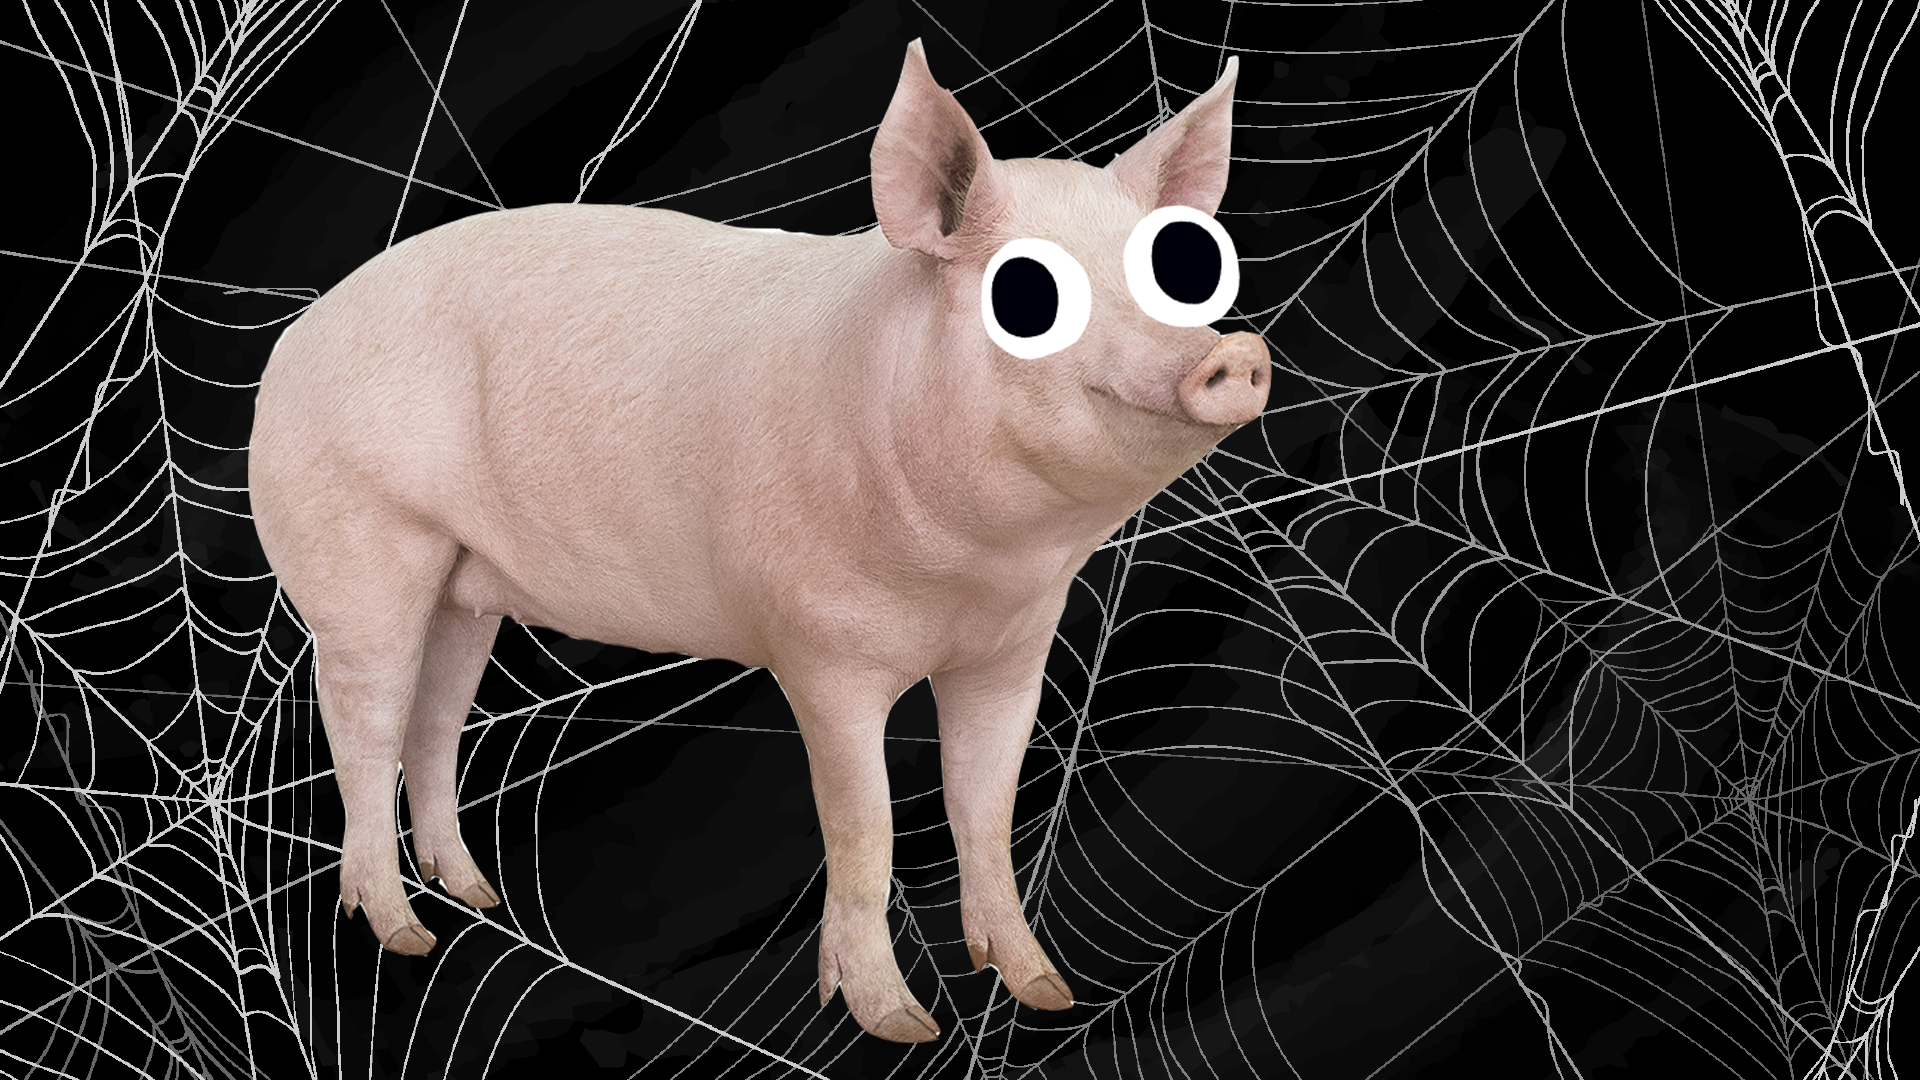 A pig on a spider web background